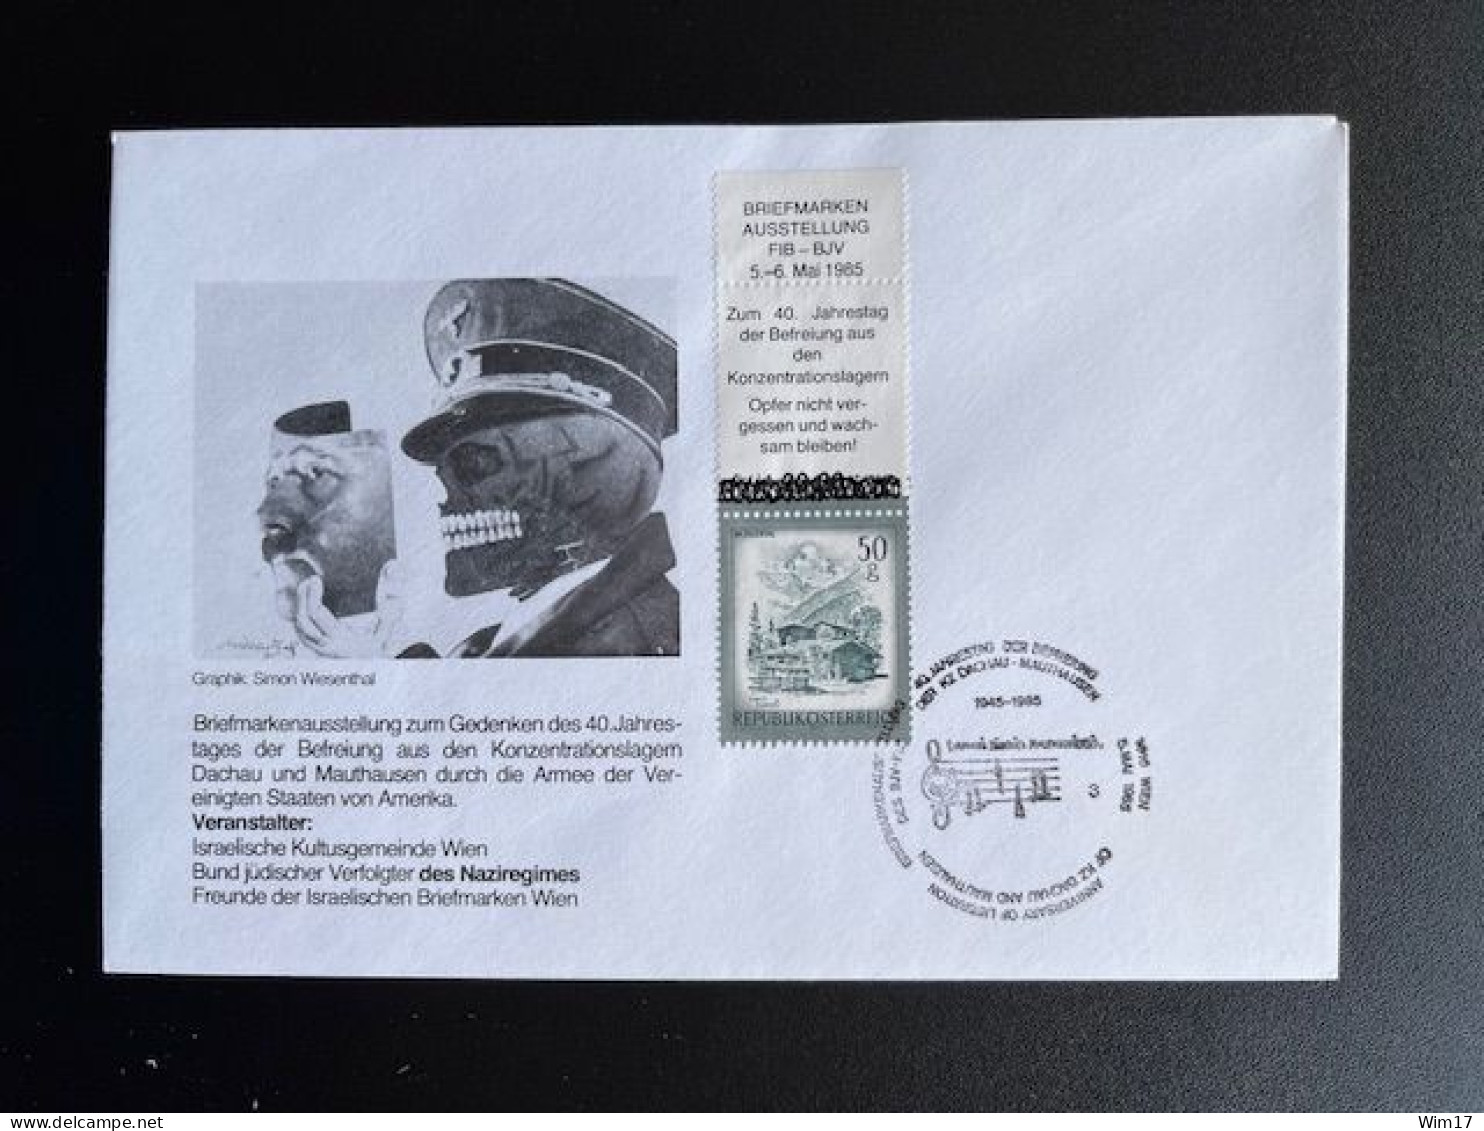 AUSTRIA 1985 SPECIAL COVER 40 YEARS LIBERATION OF DACHAU AND MAUTHAUSEN 05-05-1985 OOSTENRIJK OSTERREICH JUDAICA - Storia Postale